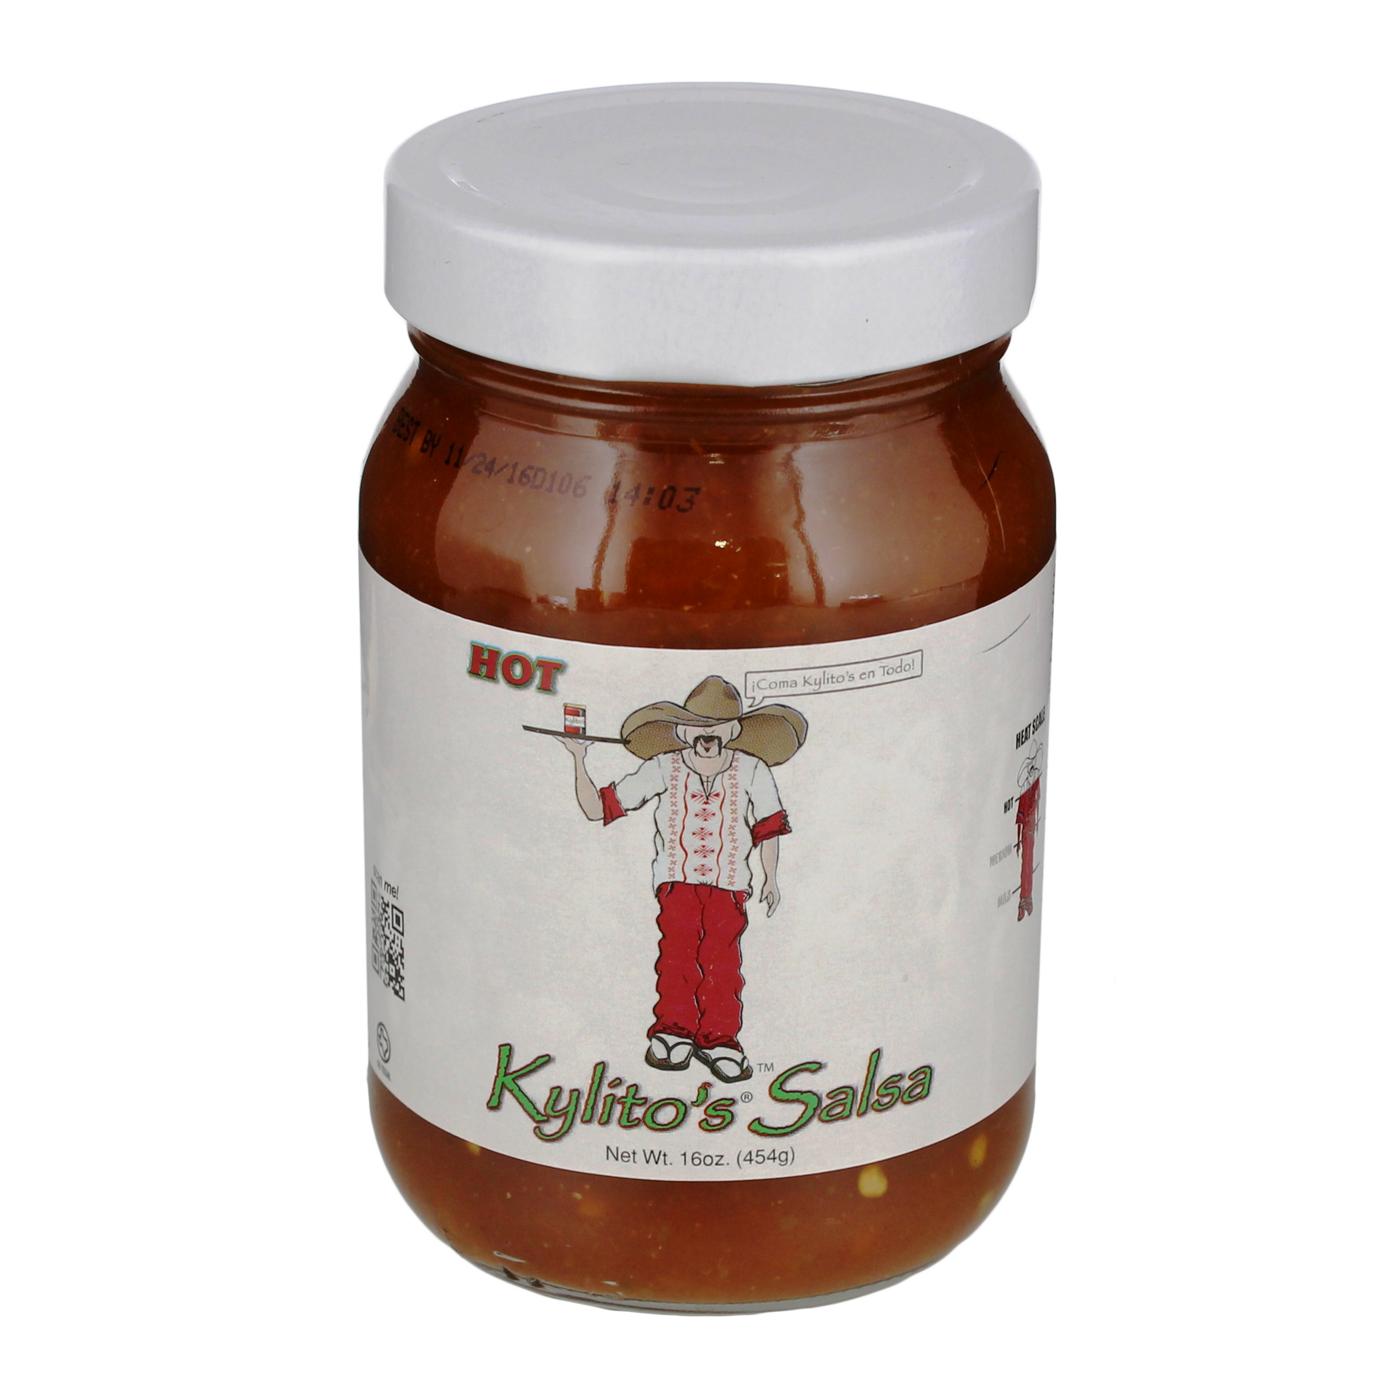 Kylito's Hot Salsa; image 1 of 2